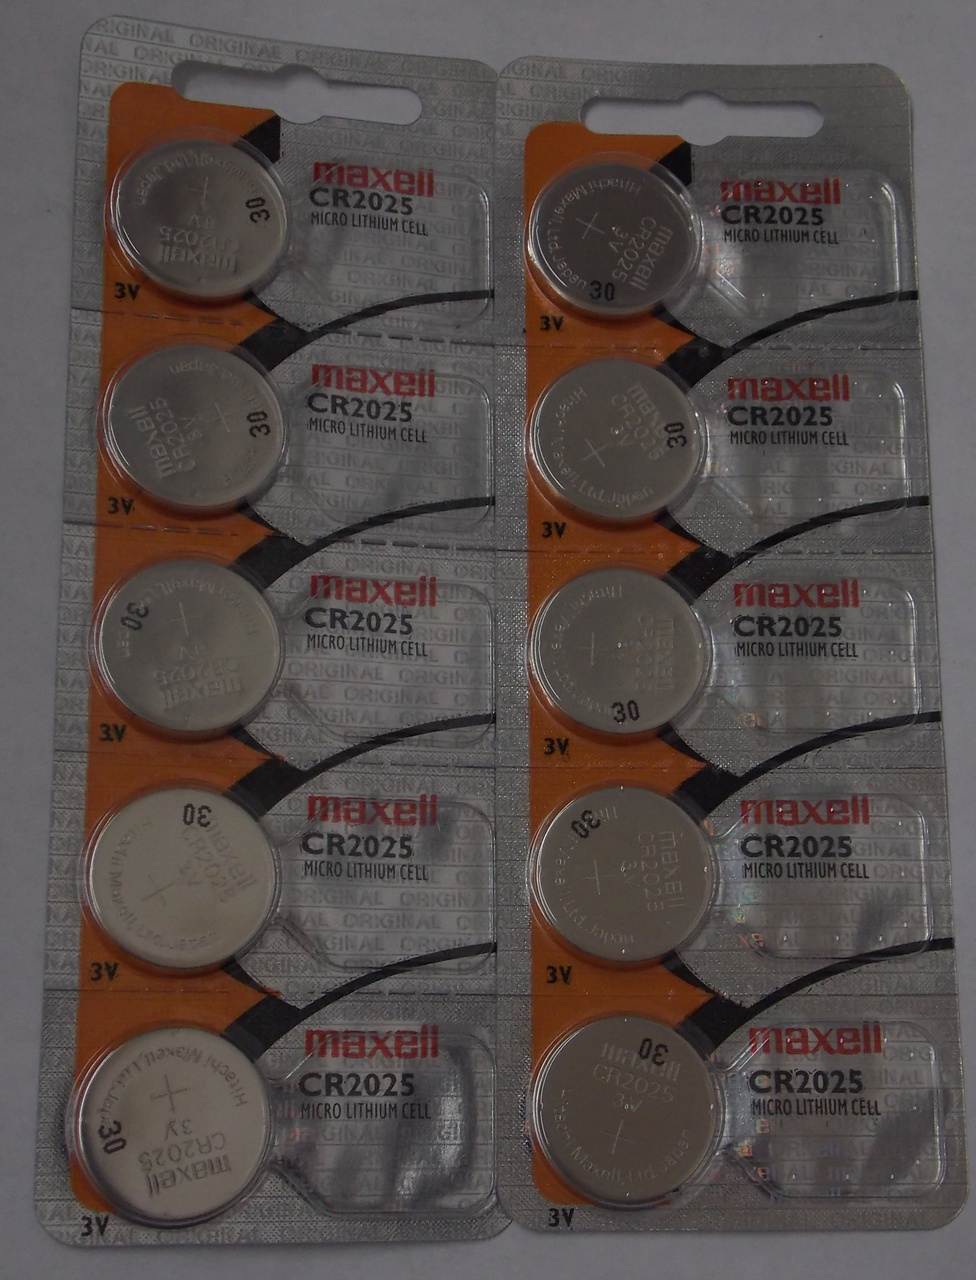 Maxell CR2025  3 Volt Lithium Coin Battery - 10 Pack - FREE SHIPPING!